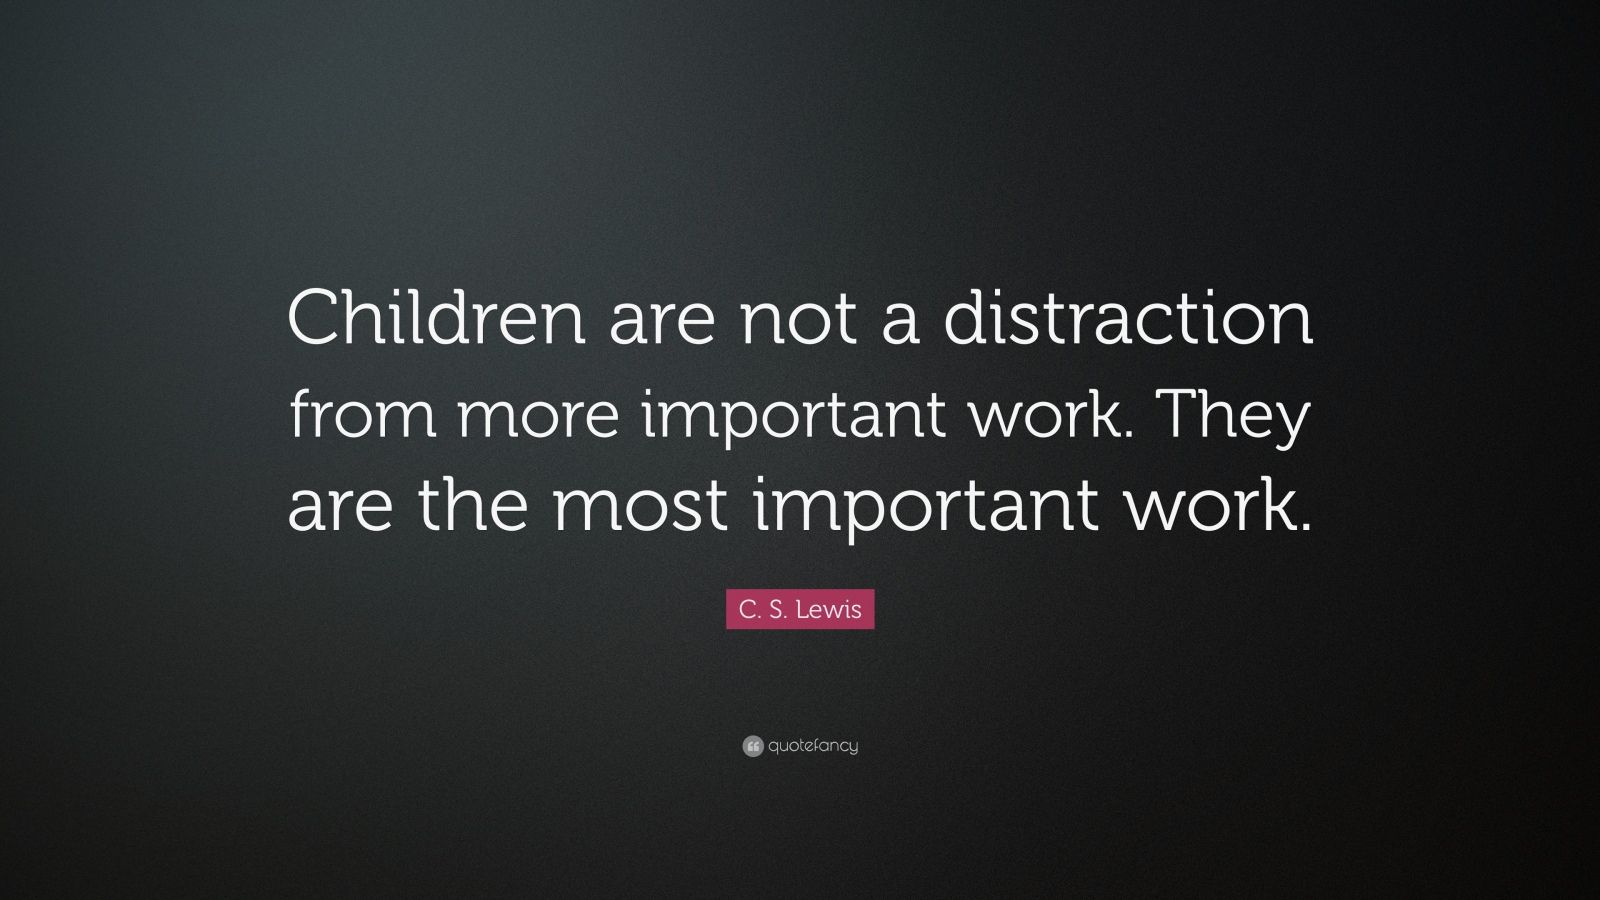 C. S. Lewis Quote: “Children are not a distraction from more important